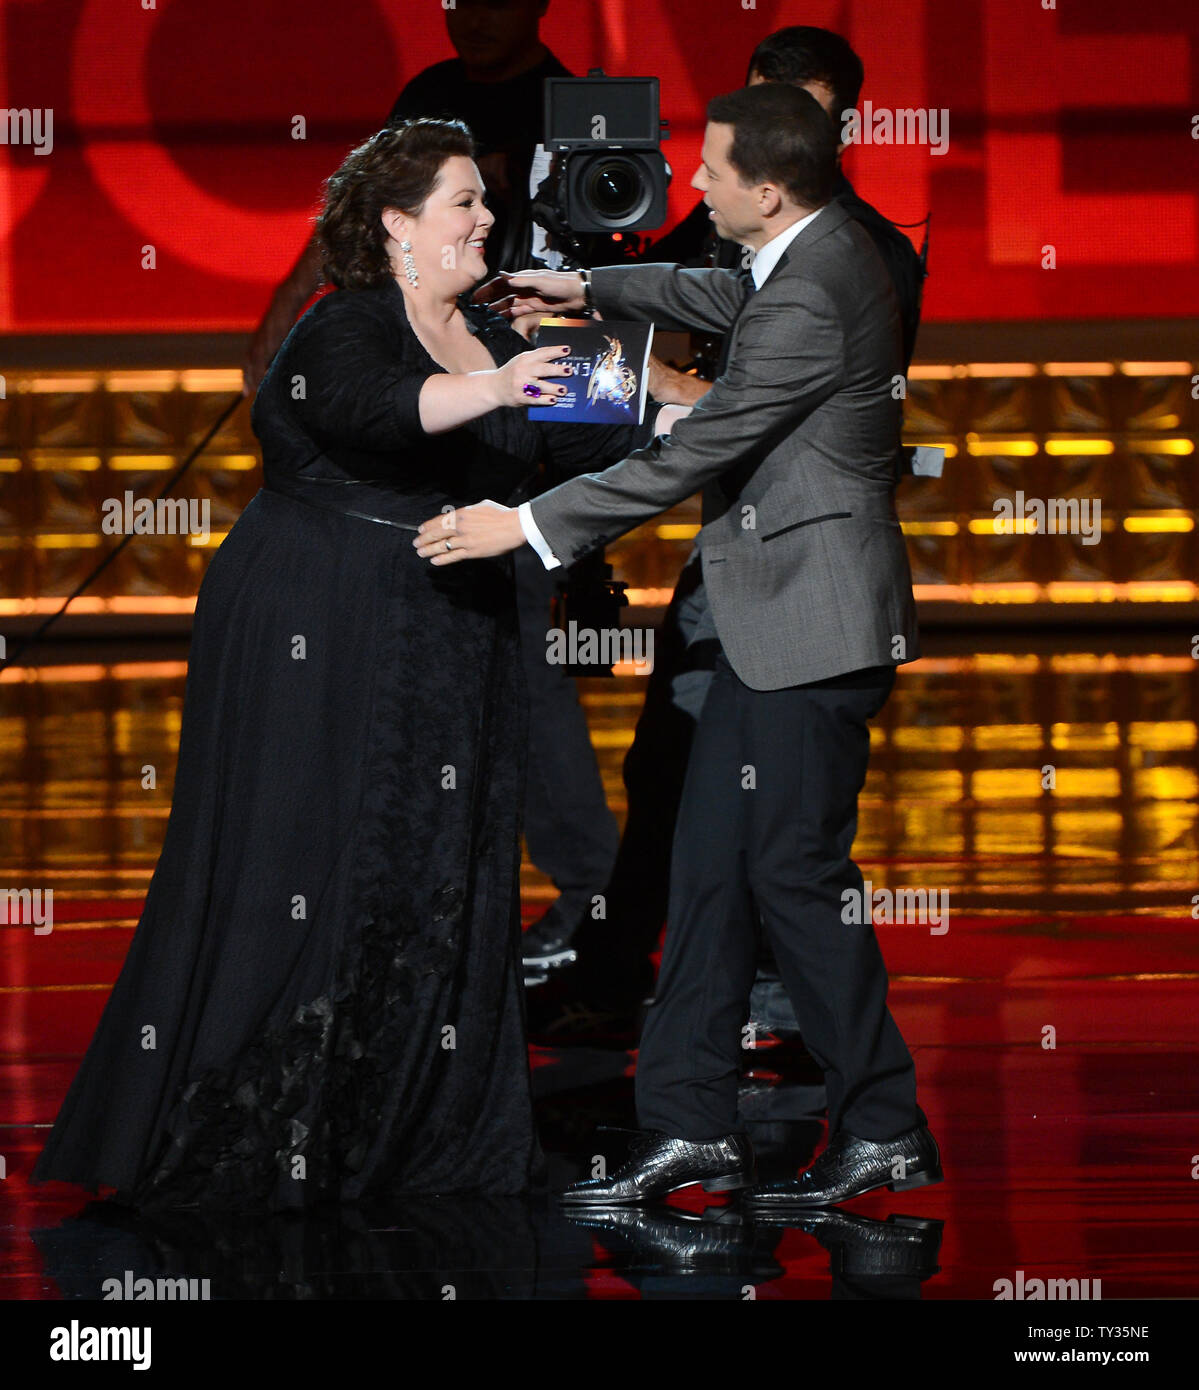 Actress Melissa McCarthy presents the Emmy Award to actor Jon Cryer onstage  at the 64th Primetime